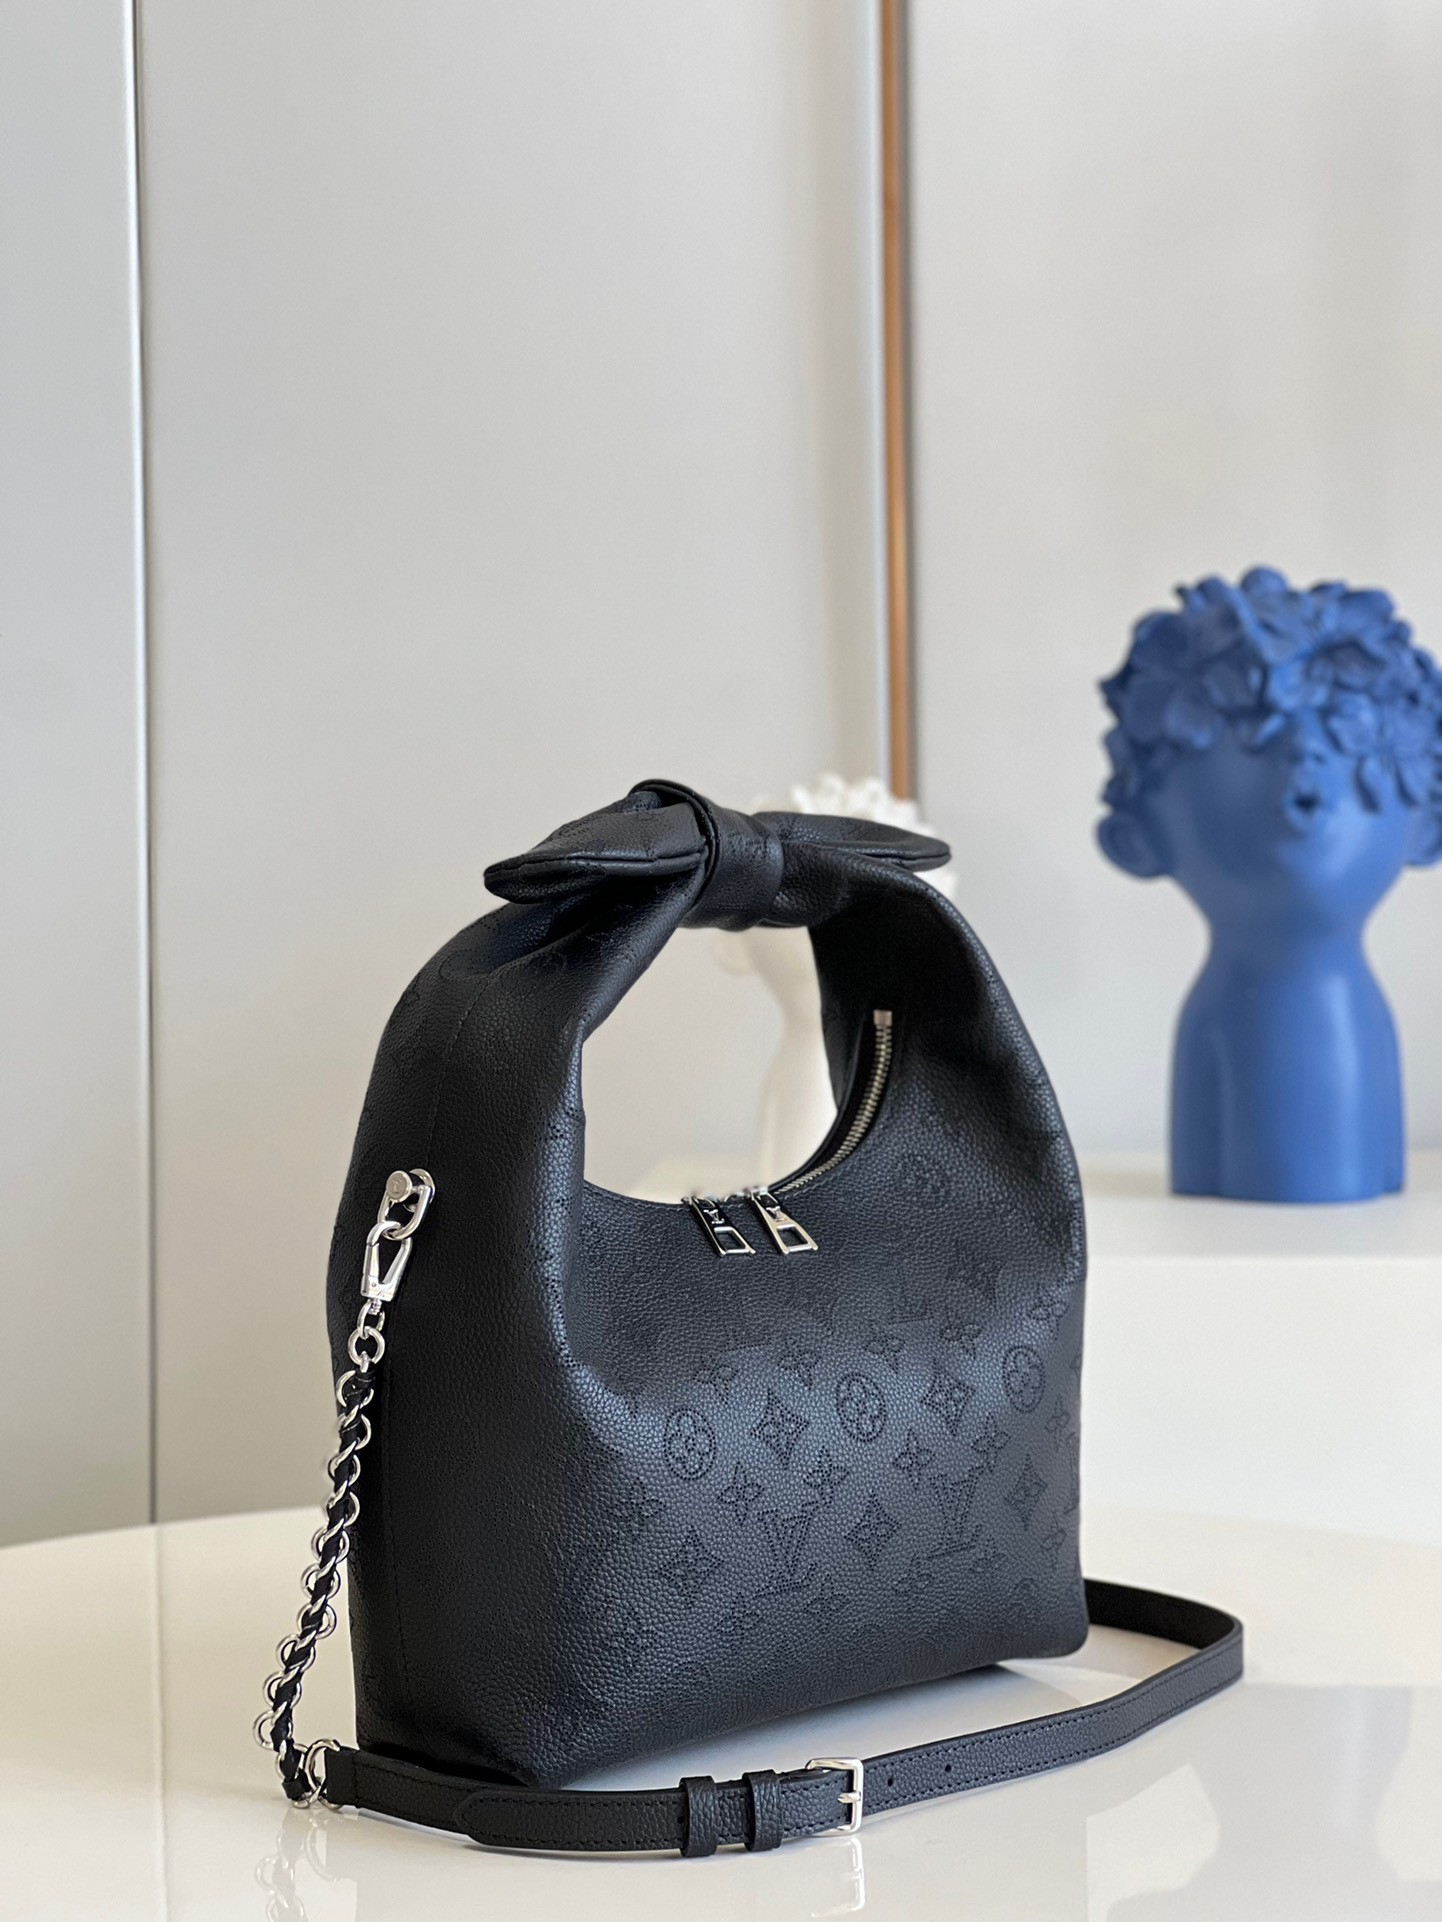 Replica Louis Vuitton Black Capucines PM Bag With Braided Handle